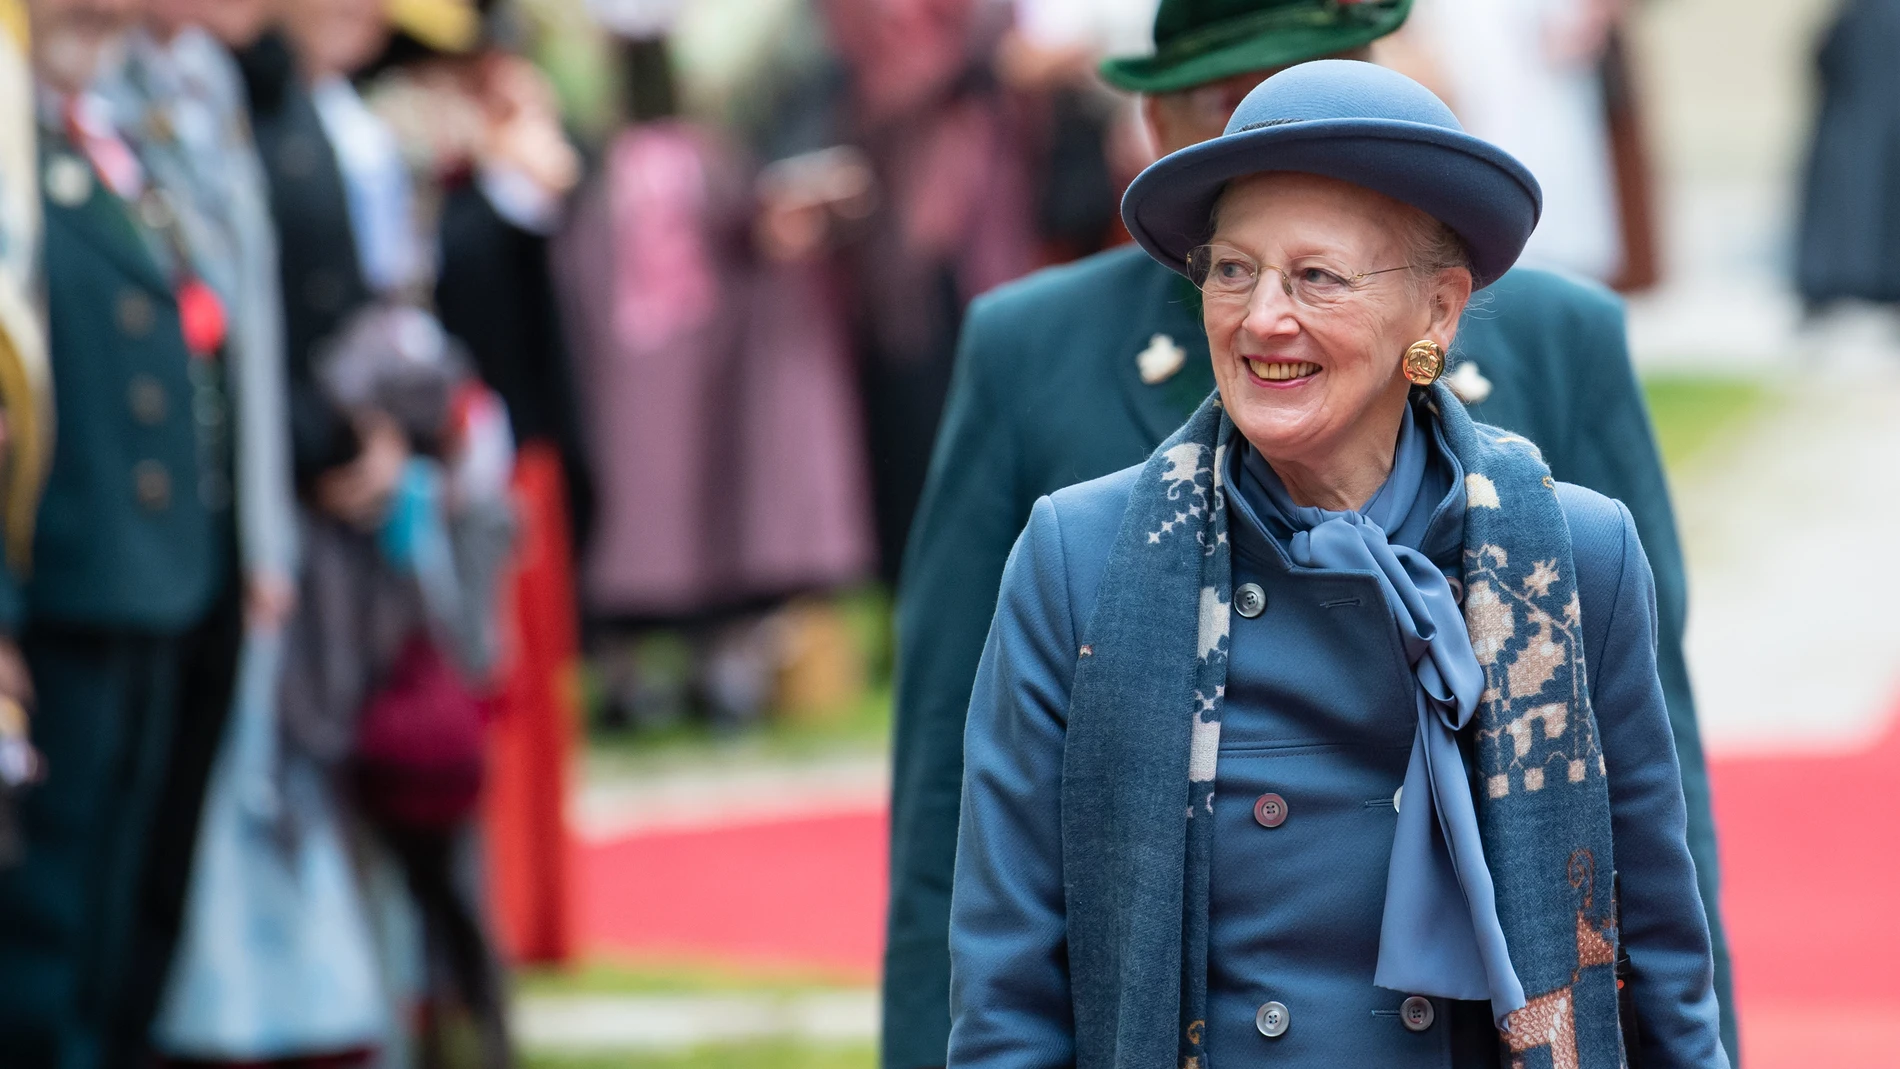 FILED - 12 November 2021, Bavaria, Munich: Queen Margrethe II of Denmark arrives at her residence during a visit to Bavaria. Margrethe II has tested positive for Covid-19, according to a statement issued by the royal family. Photo: Sven Hoppe/dpa (Foto de ARCHIVO) 12/11/2021 ONLY FOR USE IN SPAIN